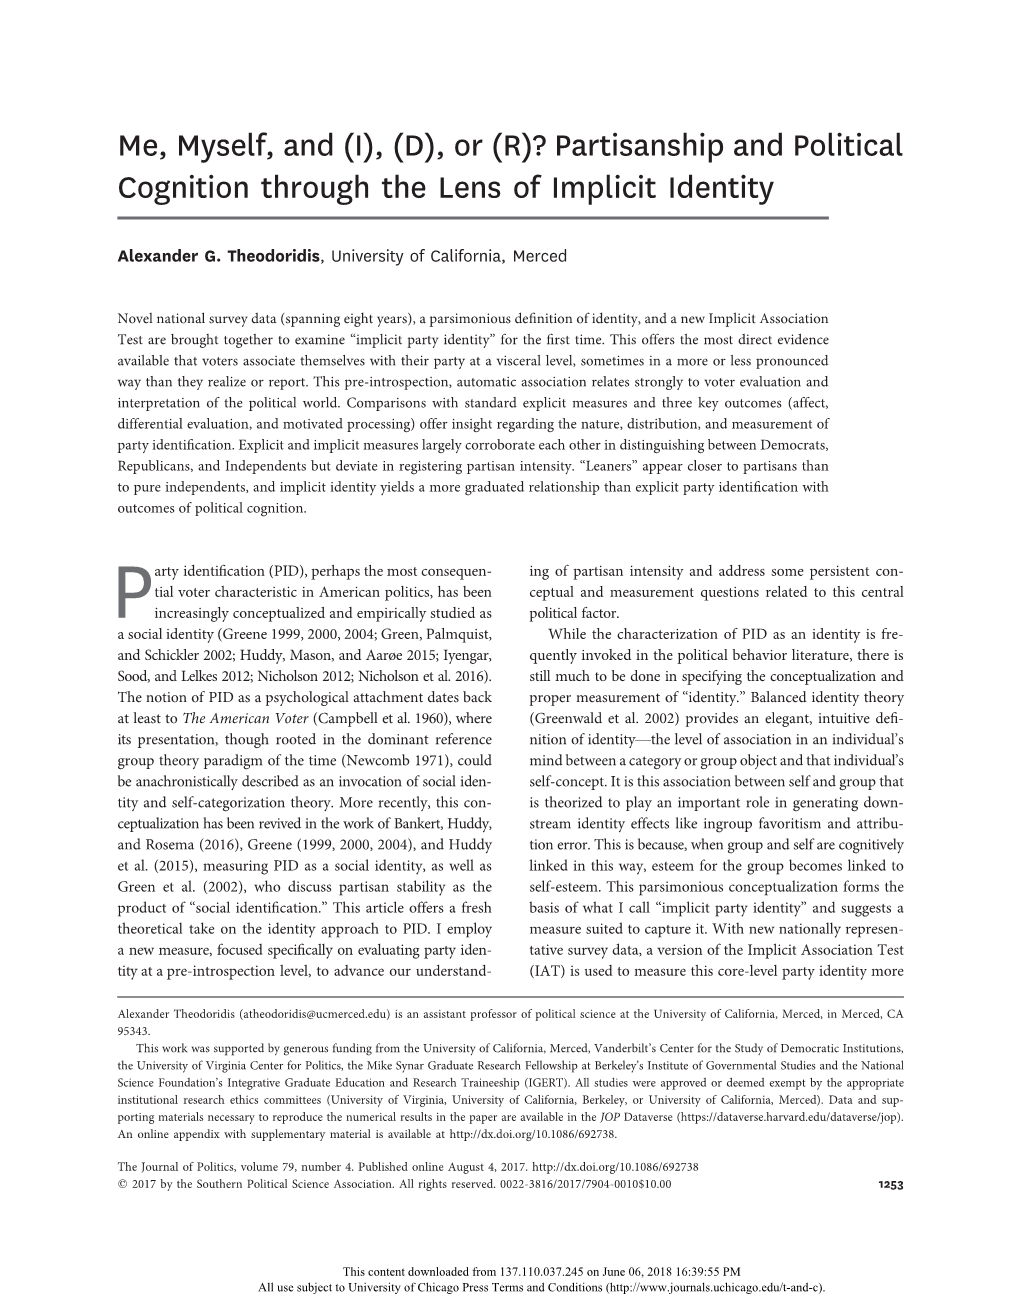 (R)? Partisanship and Political Cognition Through the Lens of Implicit Identity